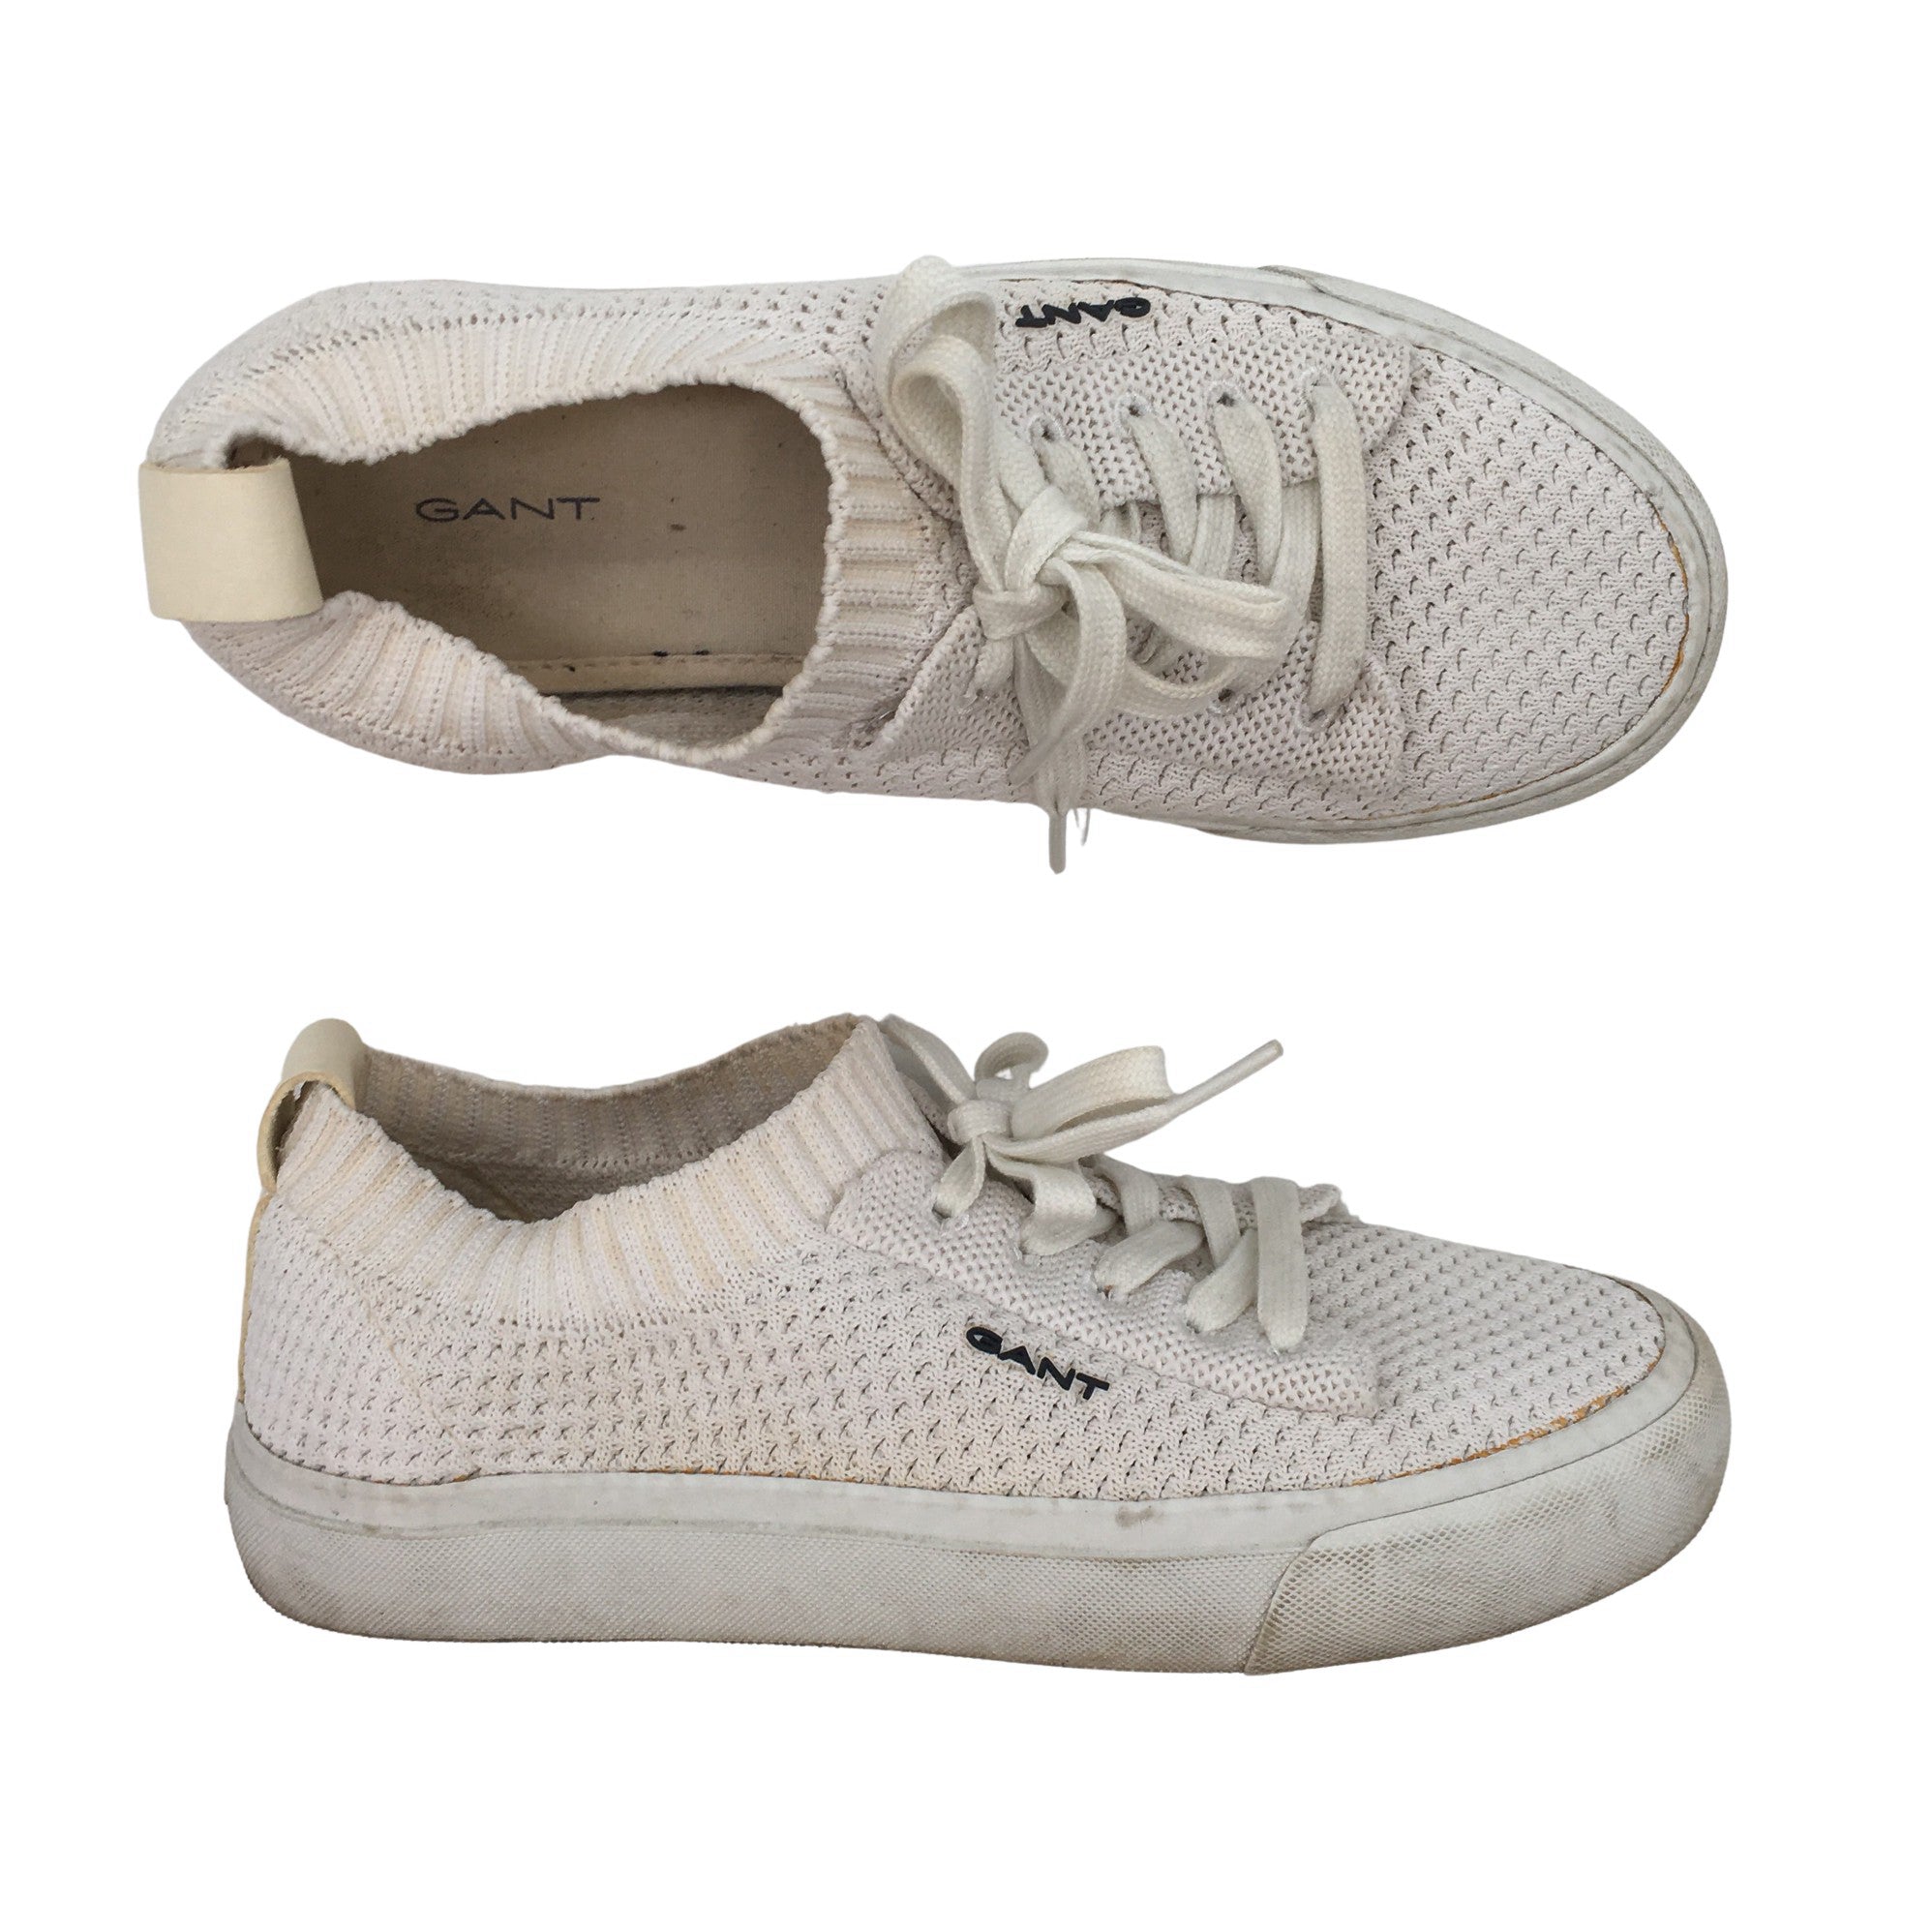 Gant Casual sneakers, size 36 (White) |